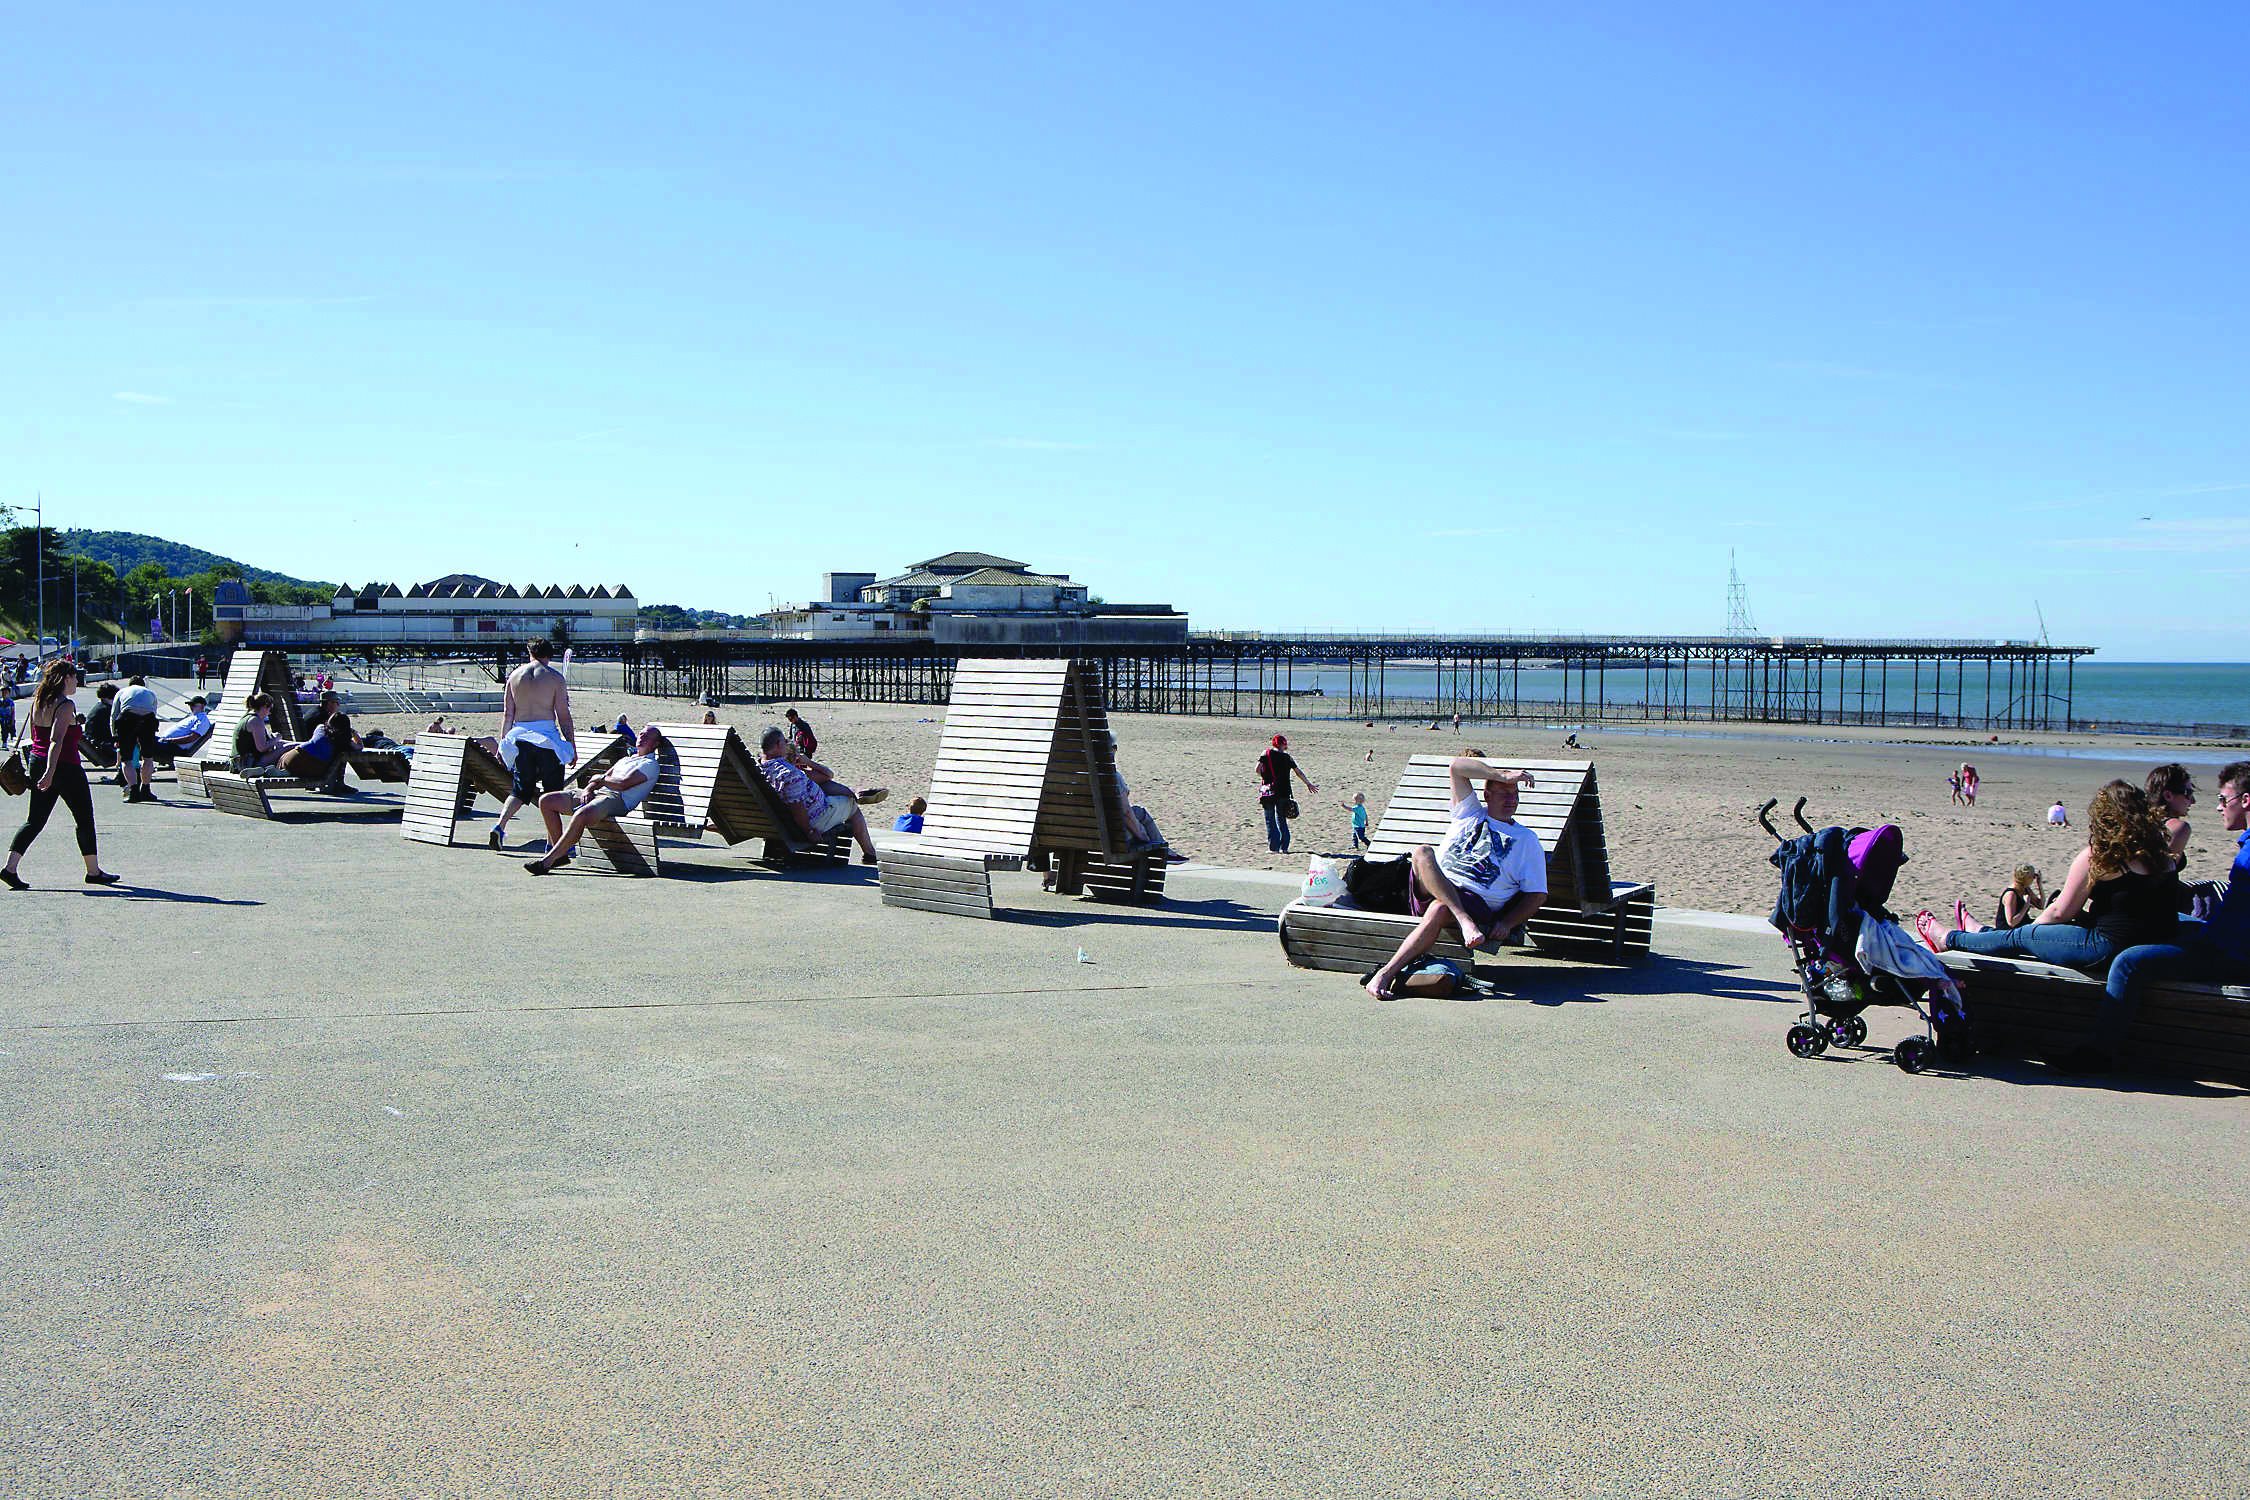 People enjoying a sunny day at Colwyn Bay, Wales